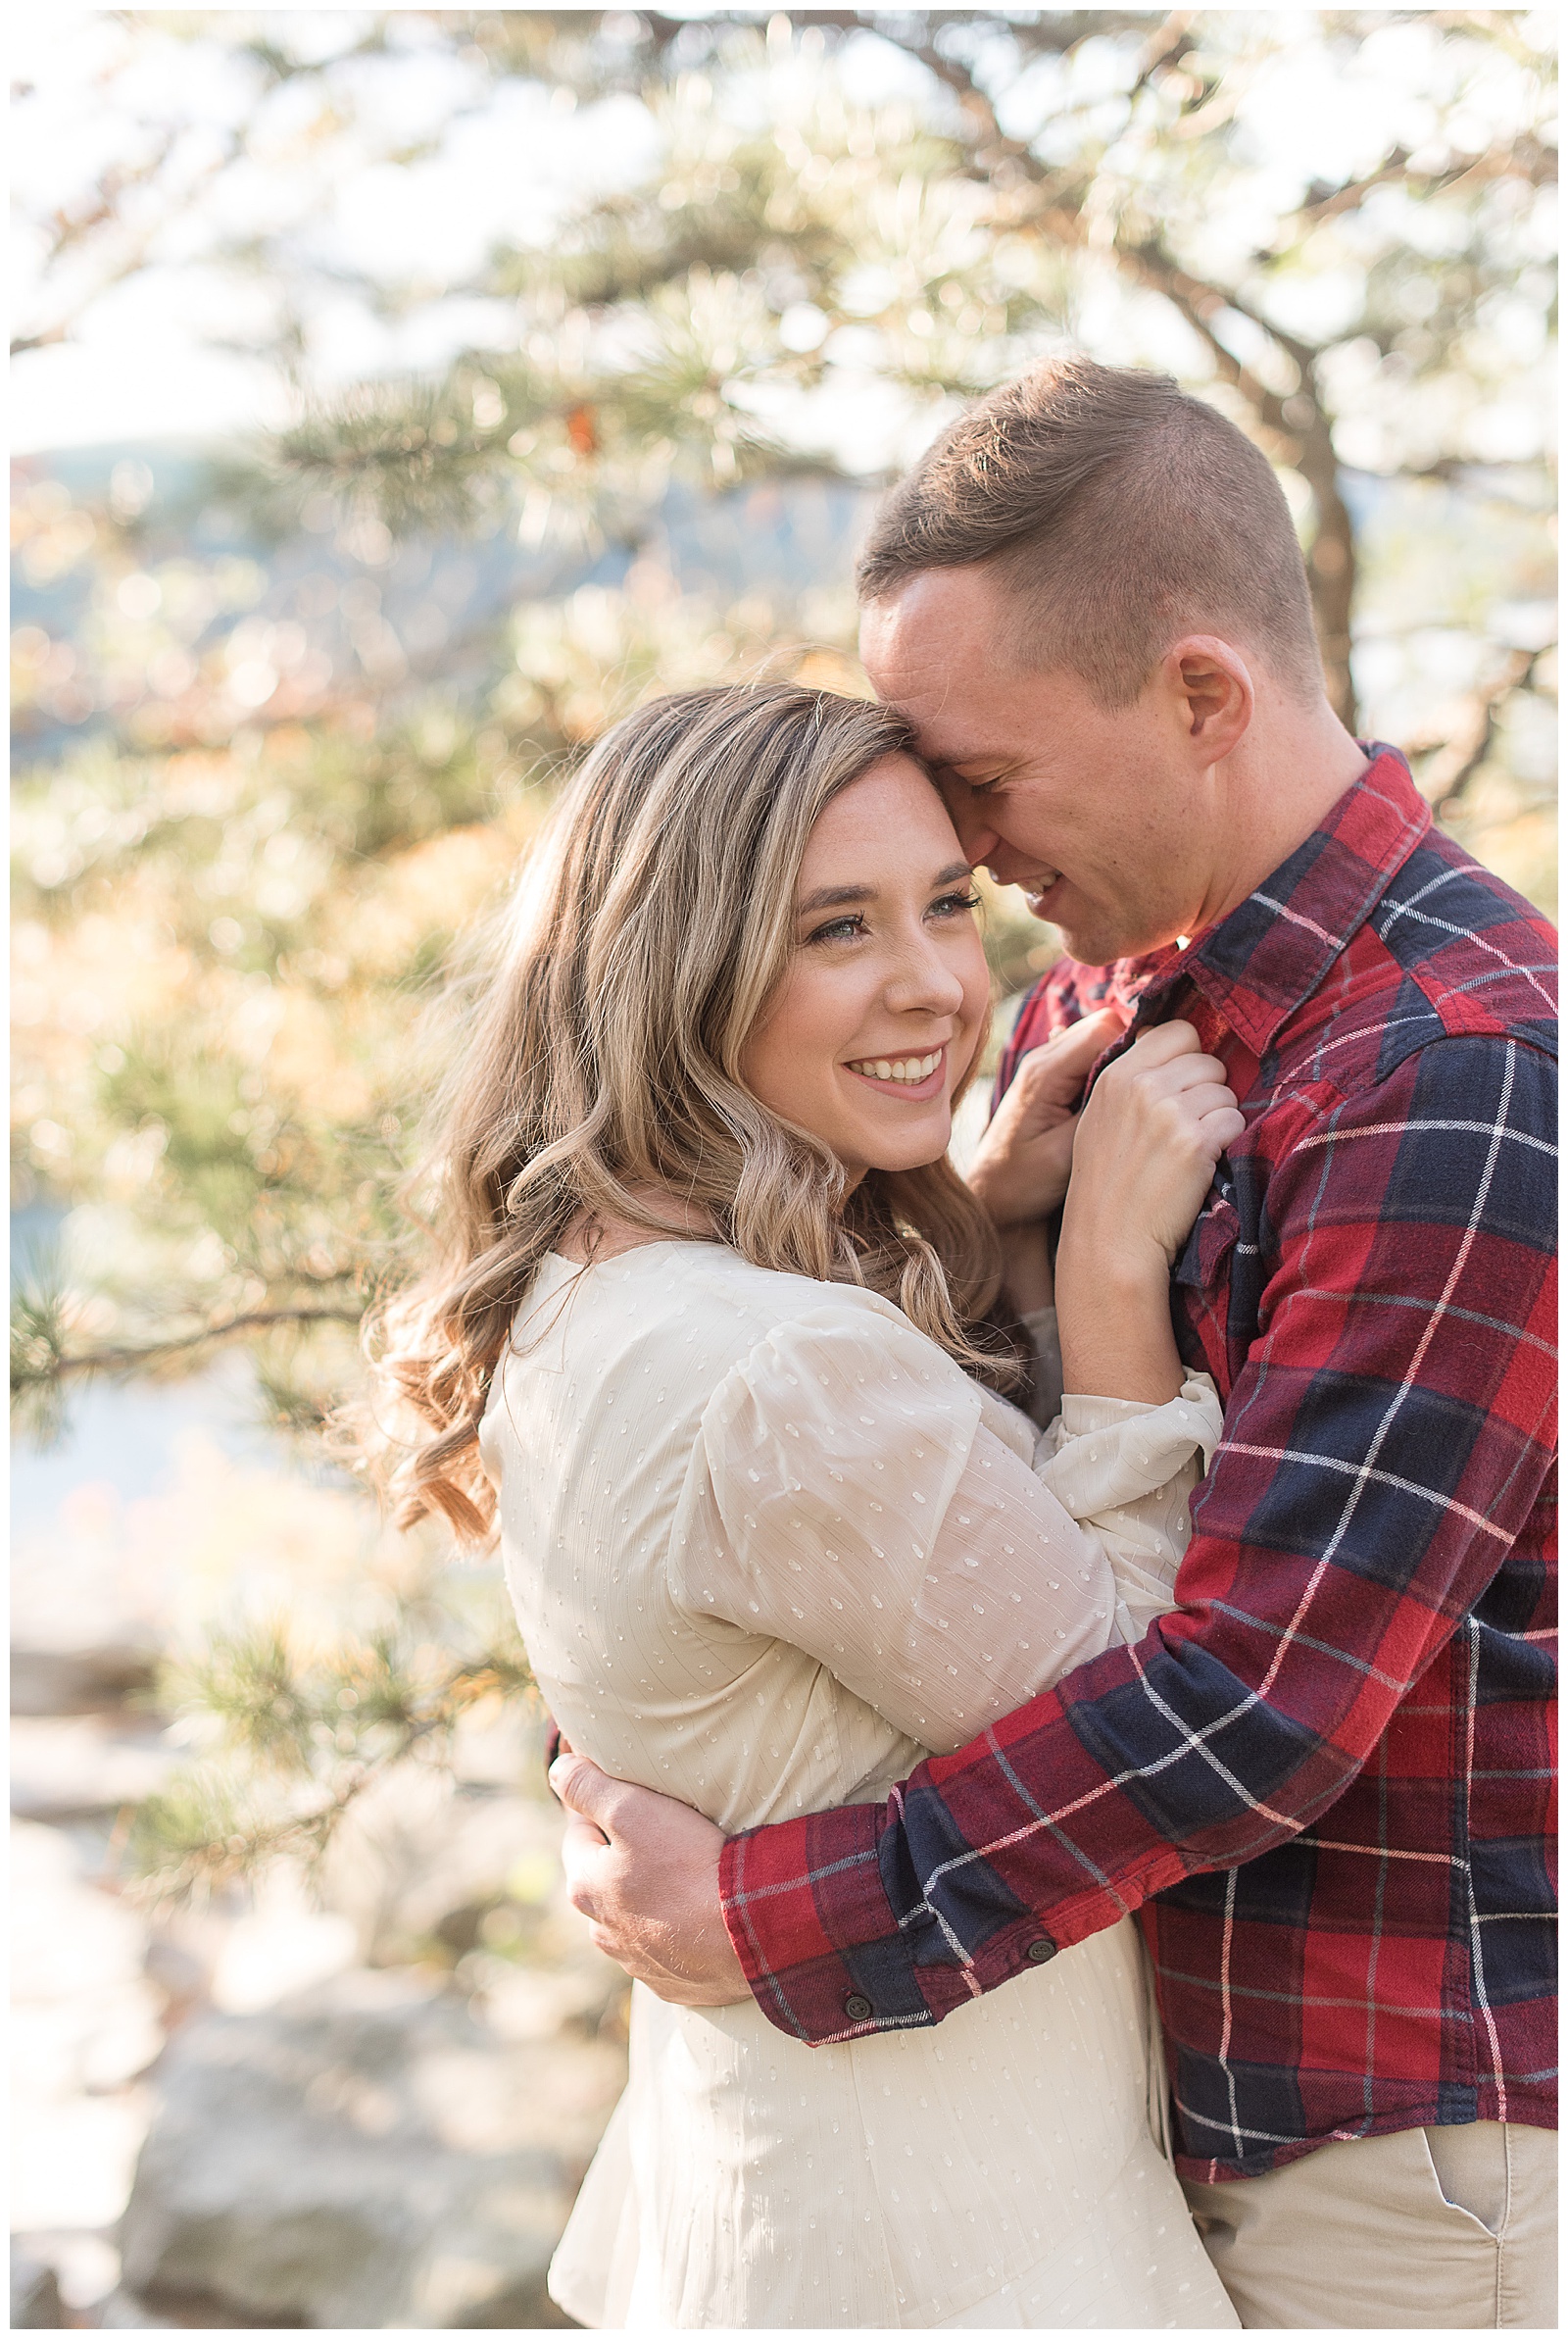 guy wrapping his arms around girl as she holds onto his flannel shirt and looks off into the distance smiling with trees behind them